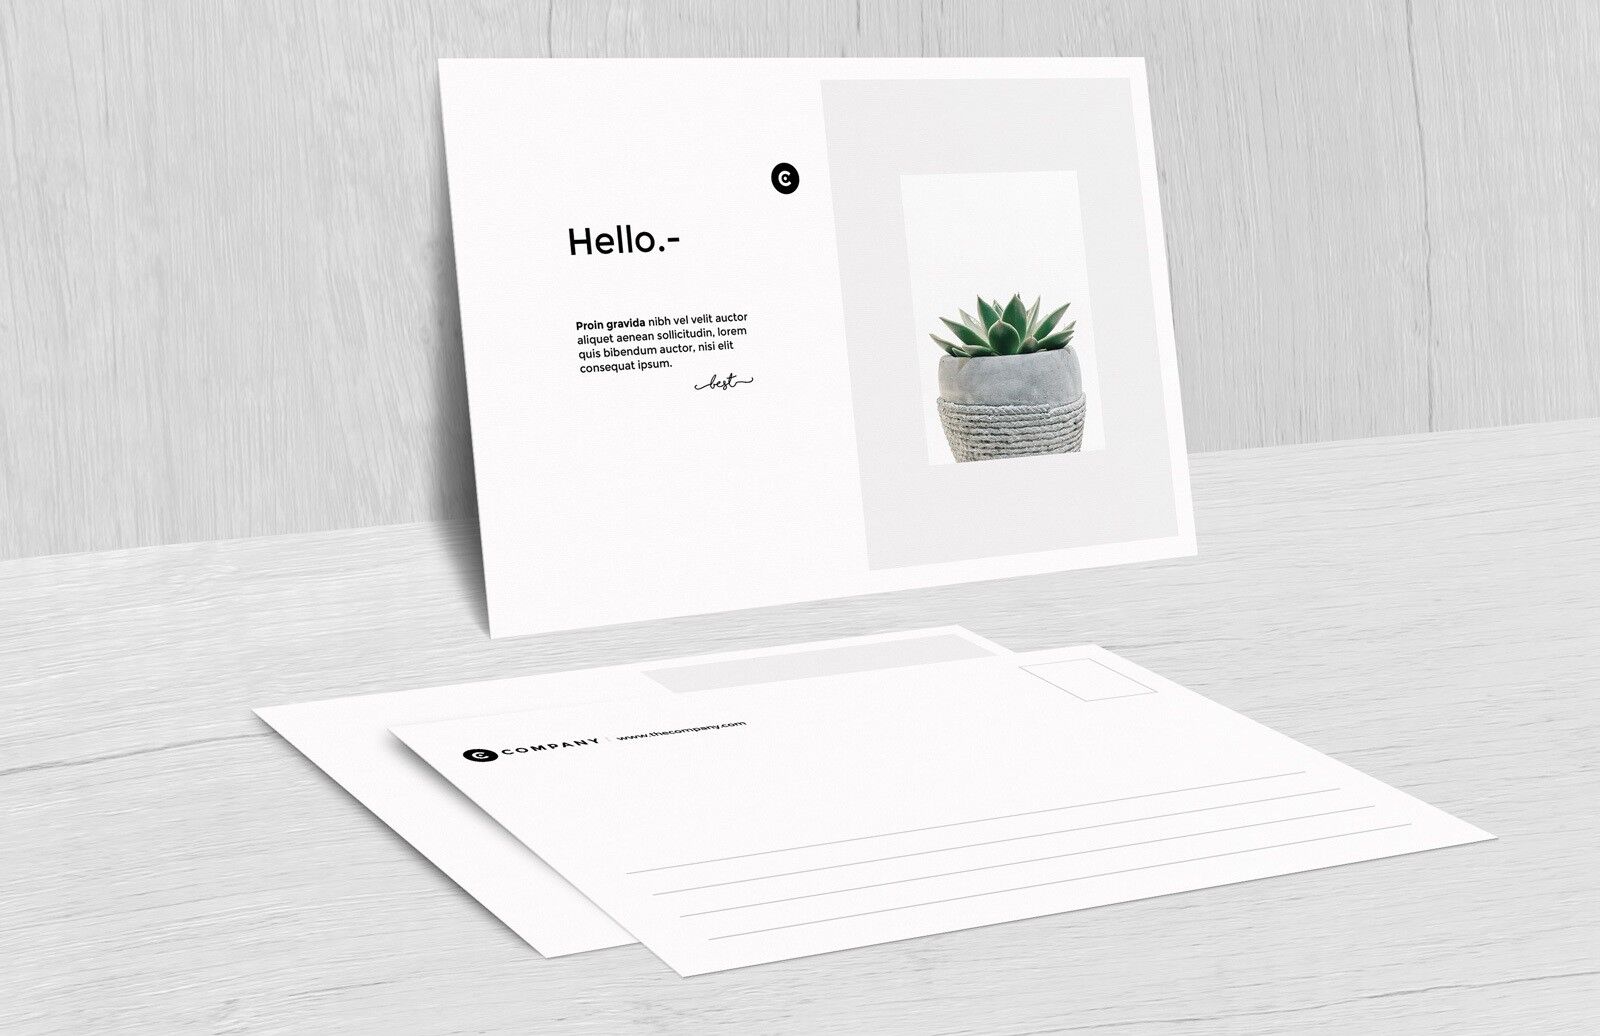 Postcard Mockup In Different Angles FREE PSD